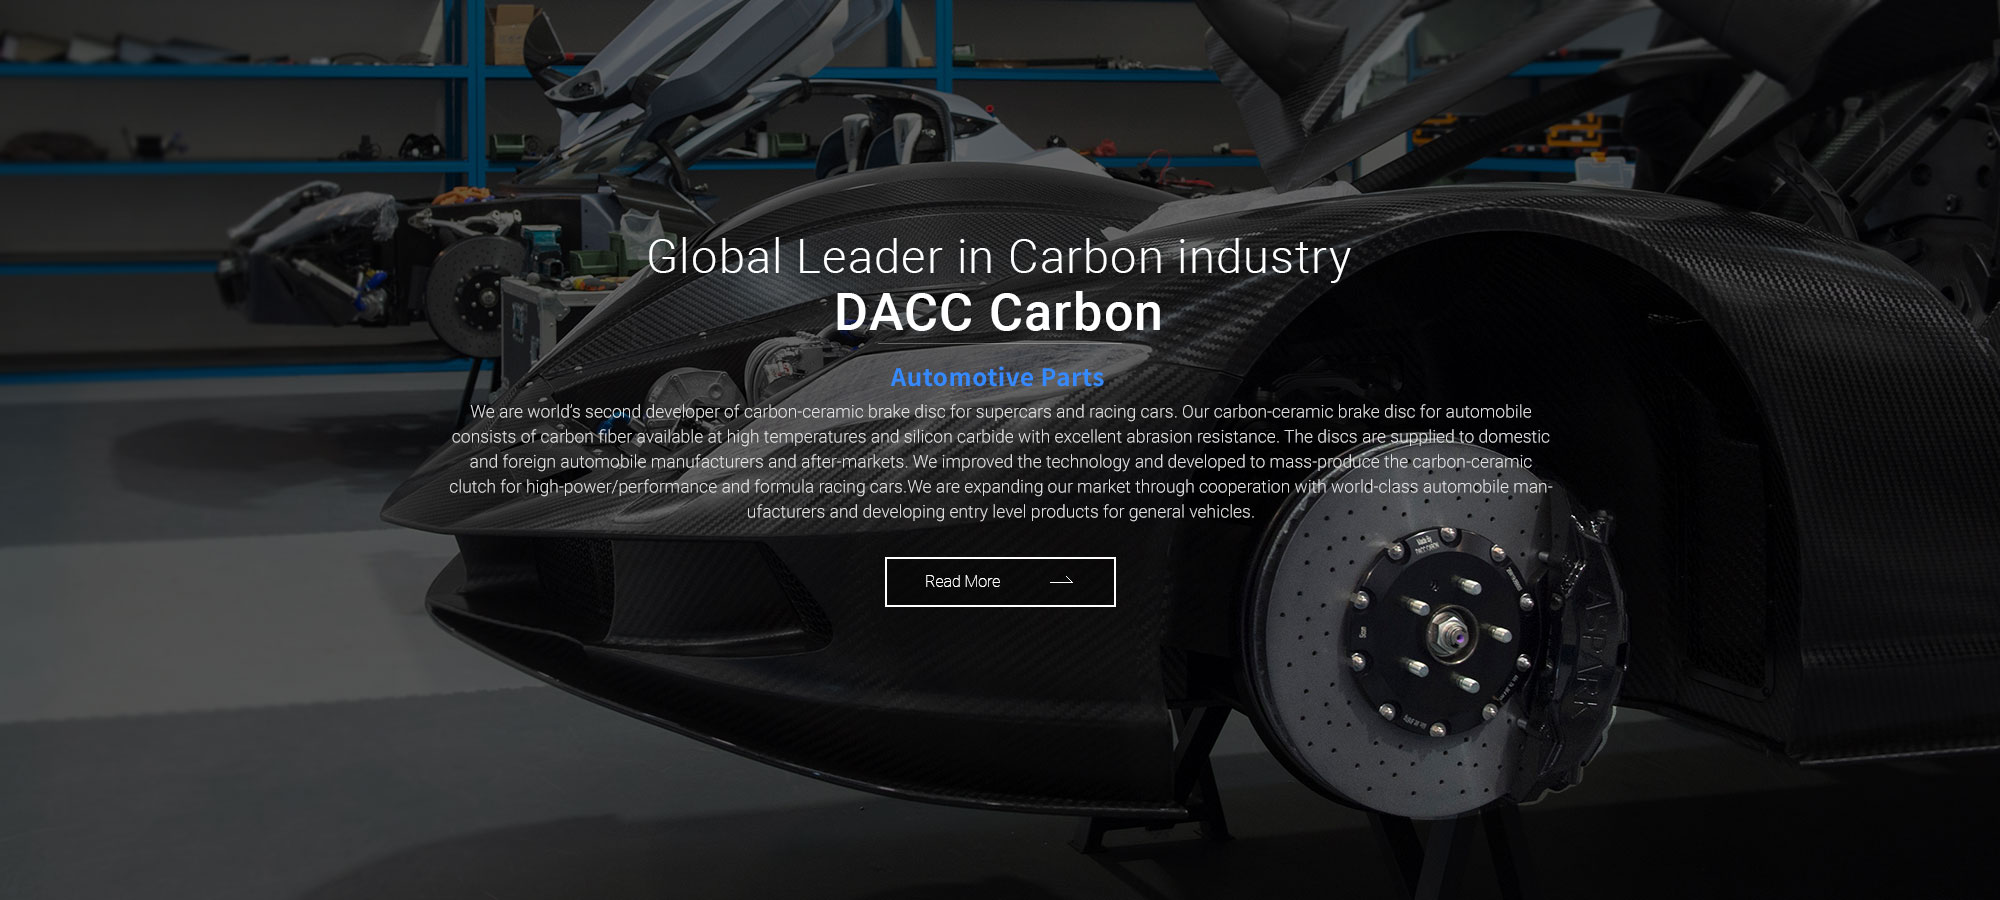 Automotive Parts 
We are world’s second developer of carbon-ceramic brake disk for supercars and racing cars. Carbon fiber available at high temperatures and ceramic materials with excellent abrasion resistance are applied. The disks are supplied to do